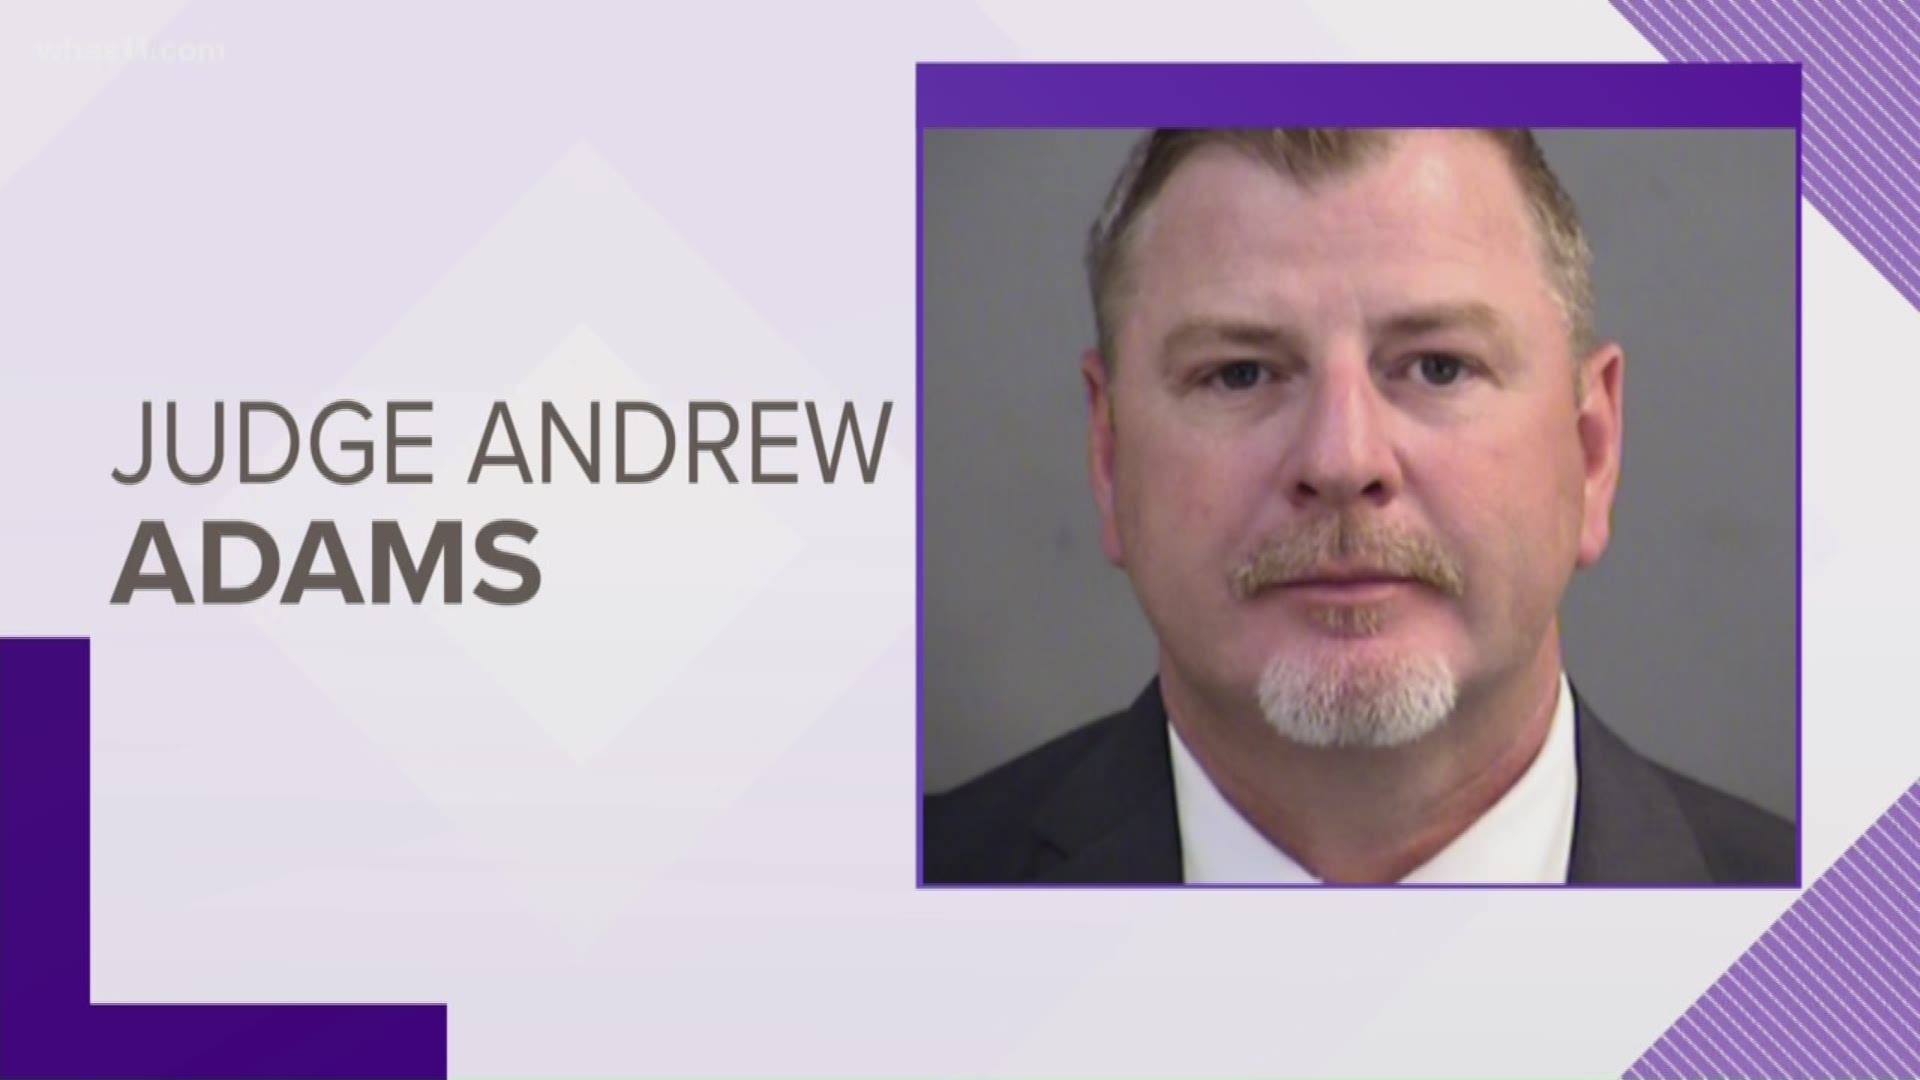 Judge Andrew Adams pleaded guilty to battery resulting in bodily injury in connection to a fight and shooting outside an Indianapolis White Castle in May.